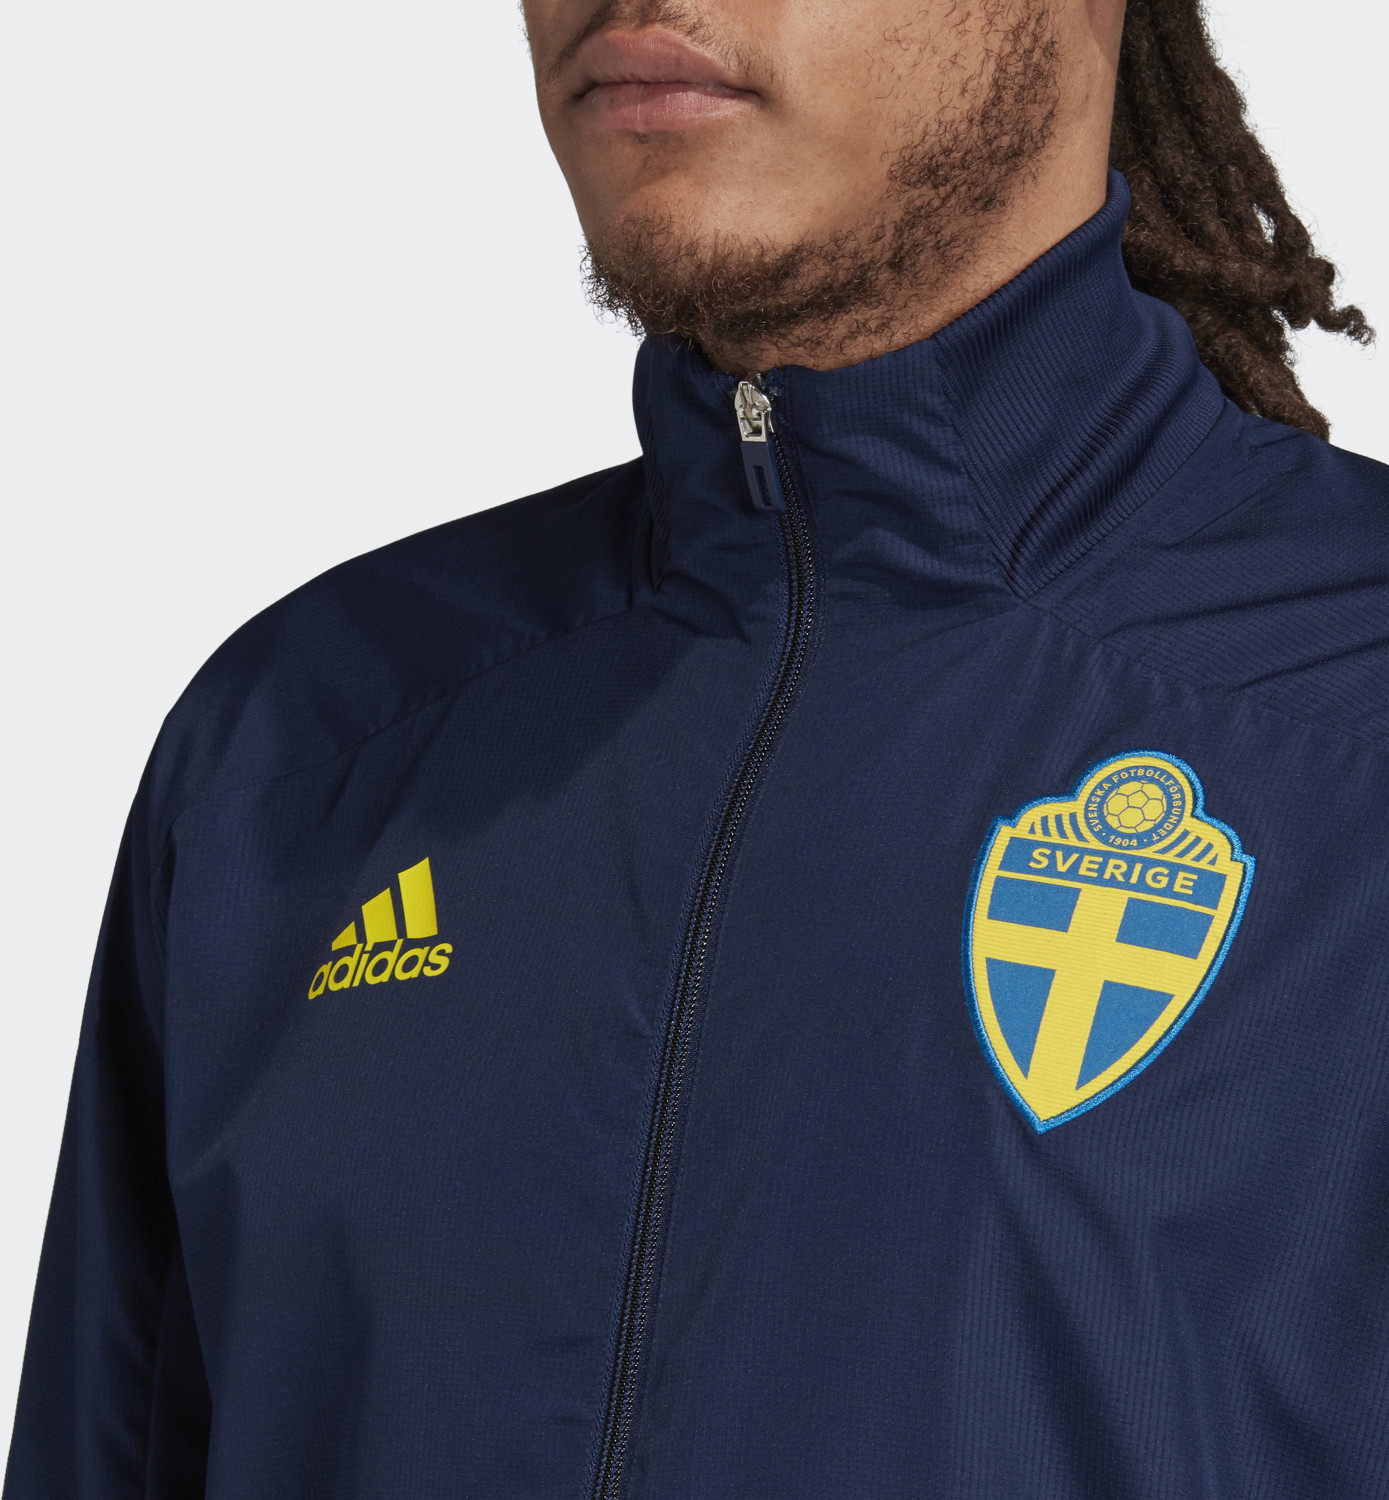 Buy Adidas Sweden Woven Jacket night indigo (FH7624) from £53.01 (Today ...